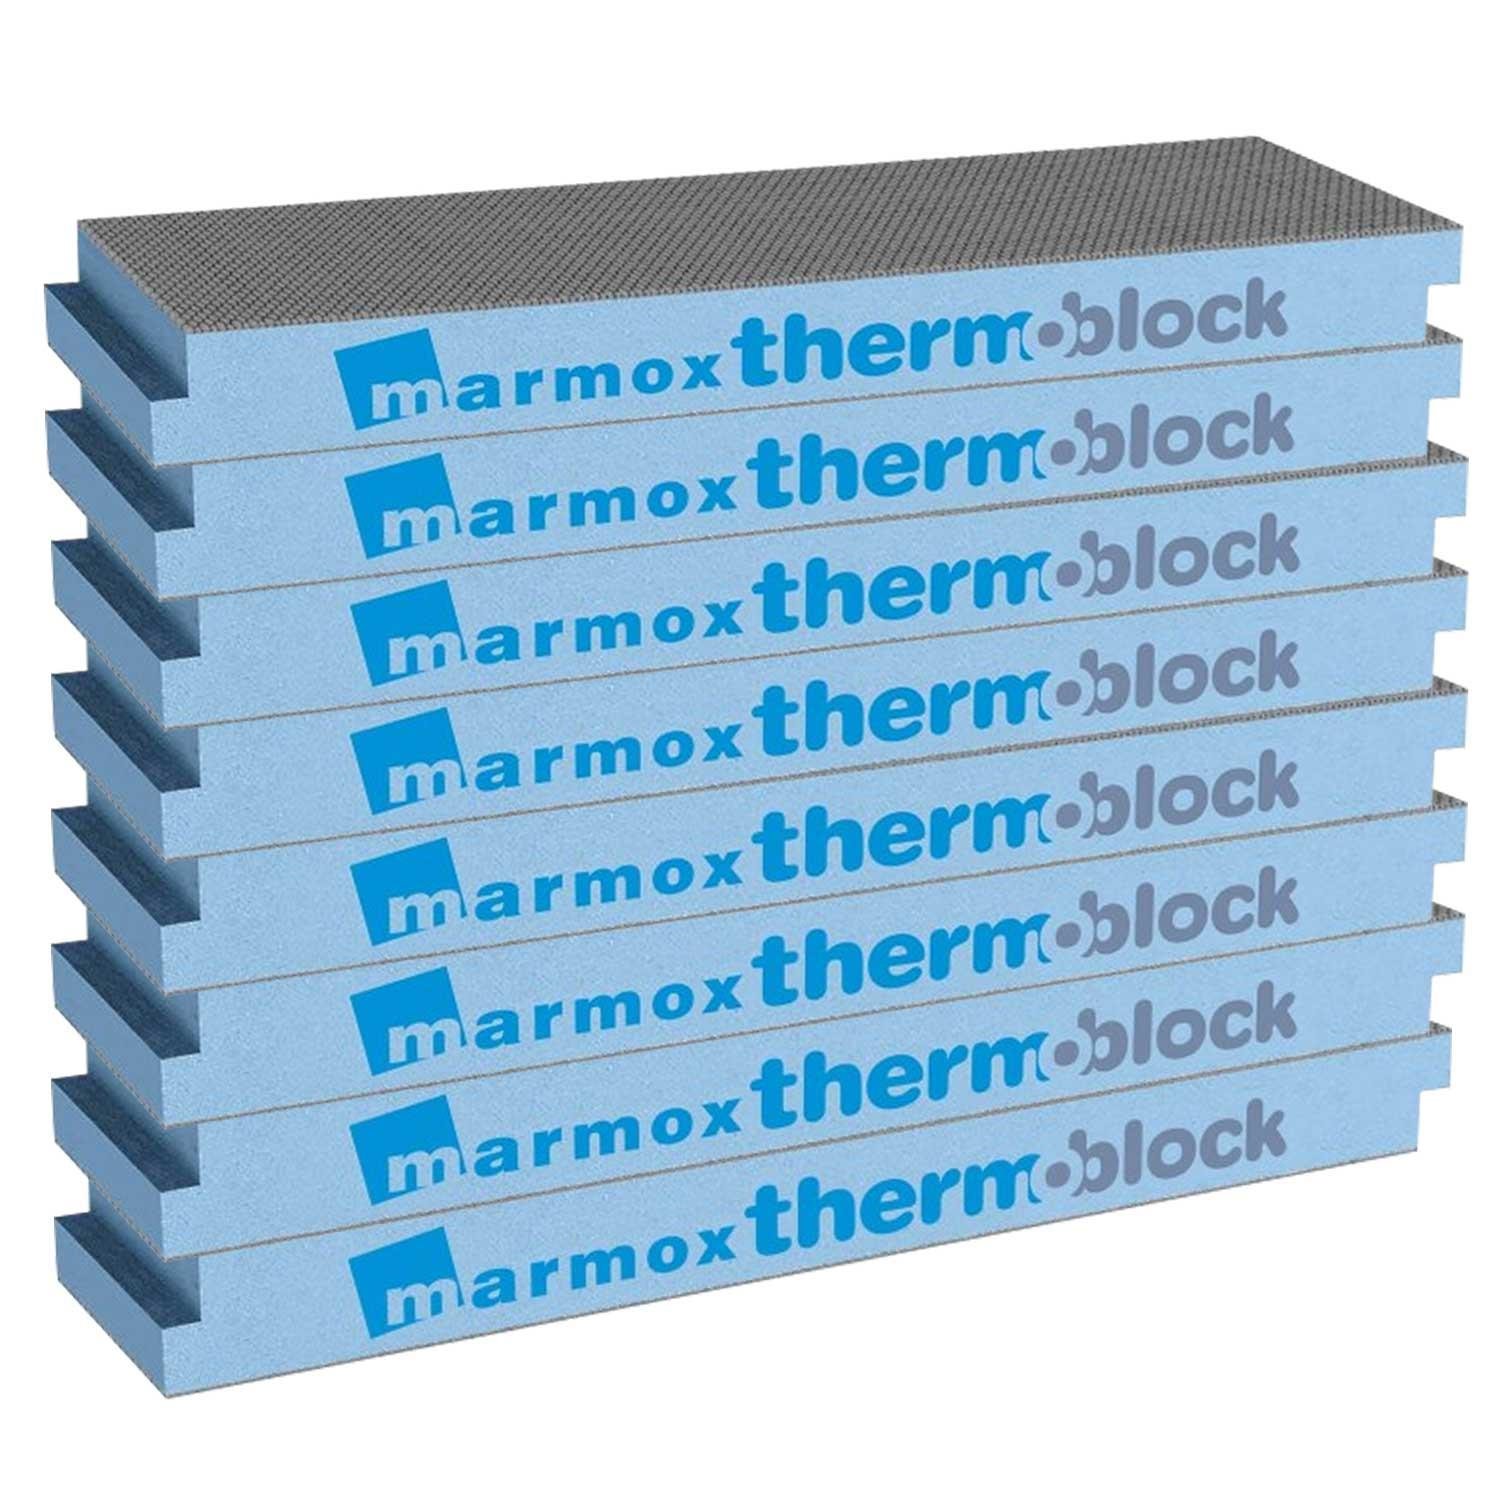 Marmox Thermoblock Insulation Block All Size